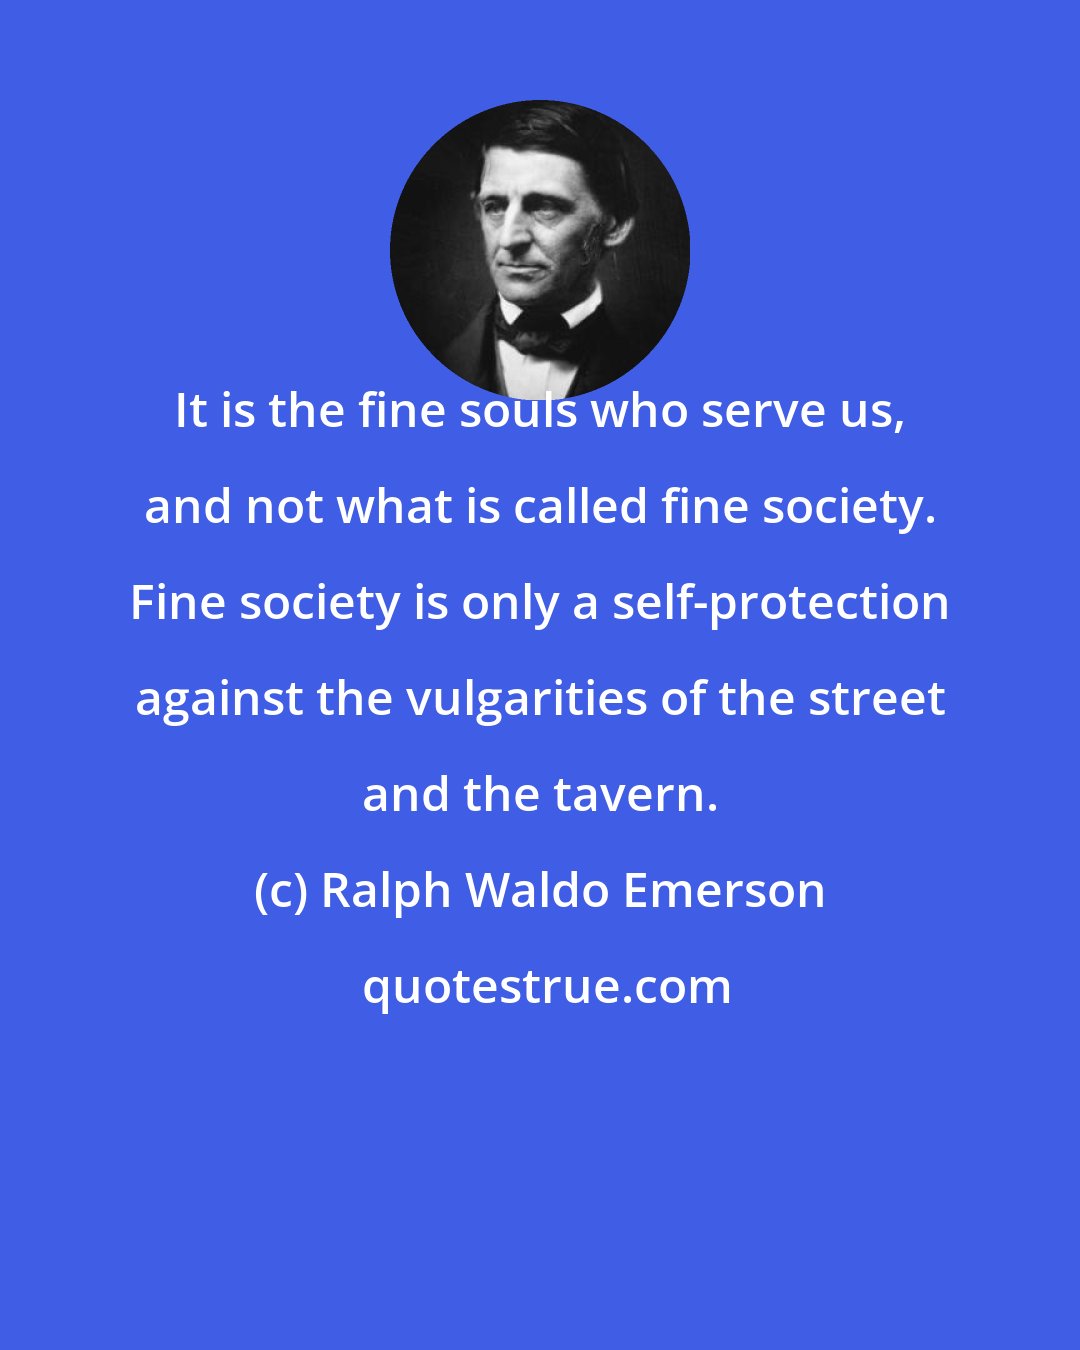 Ralph Waldo Emerson: It is the fine souls who serve us, and not what is called fine society. Fine society is only a self-protection against the vulgarities of the street and the tavern.